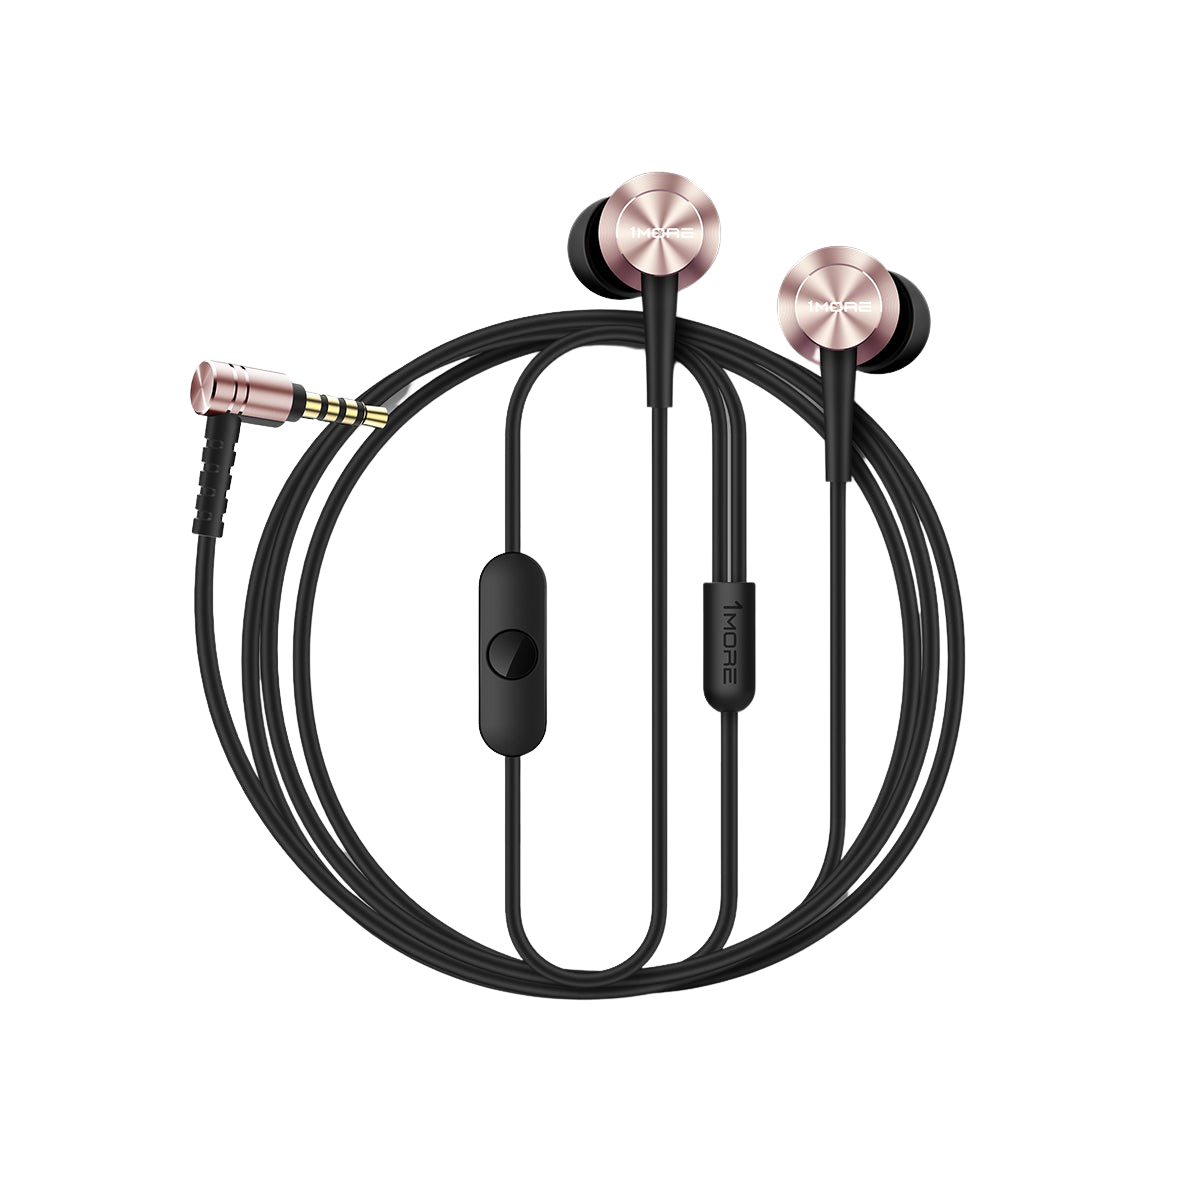 1MORE Piston Fit Wired Earphone With Mic